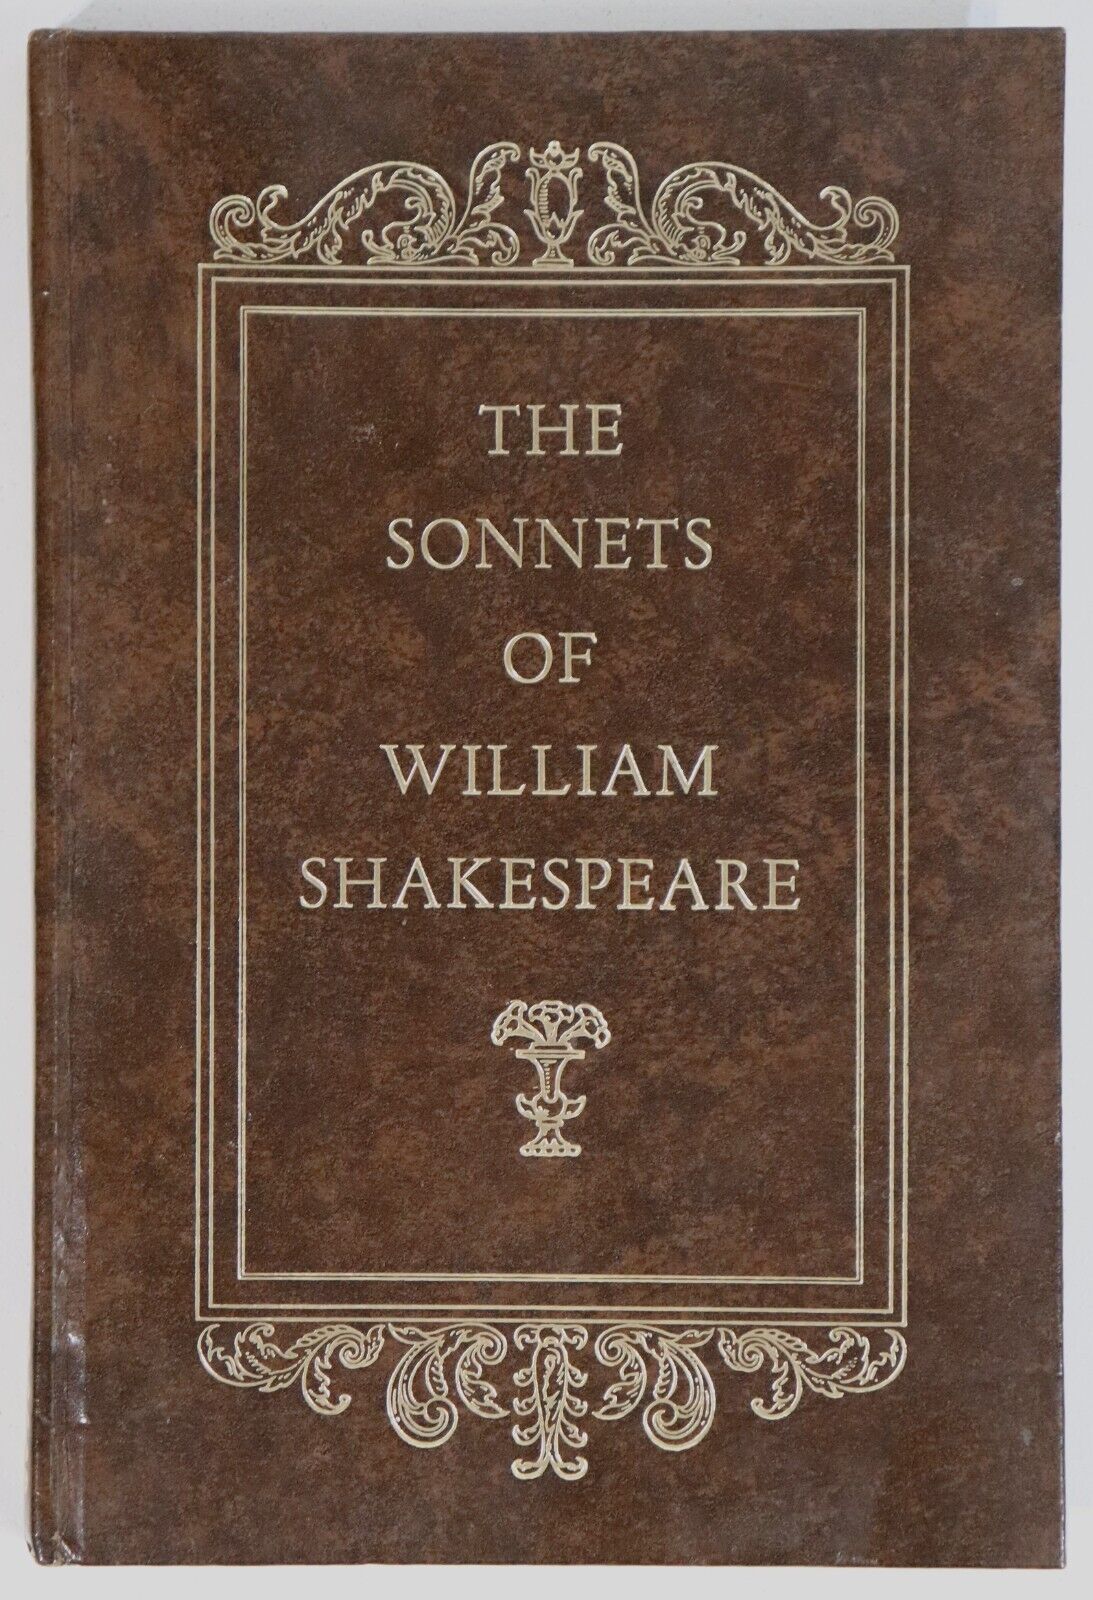 The Sonnets of William Shakespeare - 1961 - Vintage Hardcover Literature Book